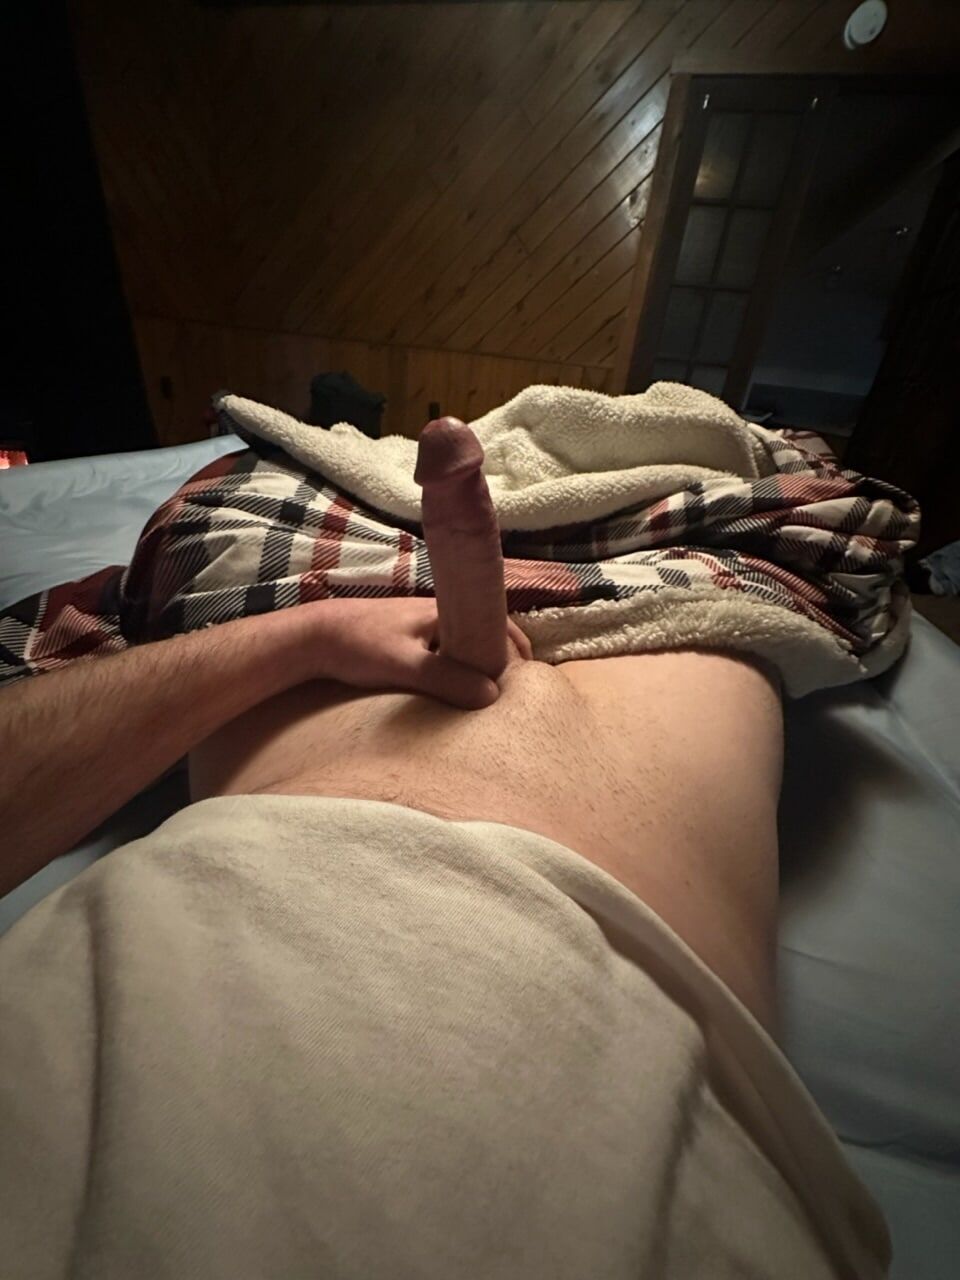 More of my cock  #25